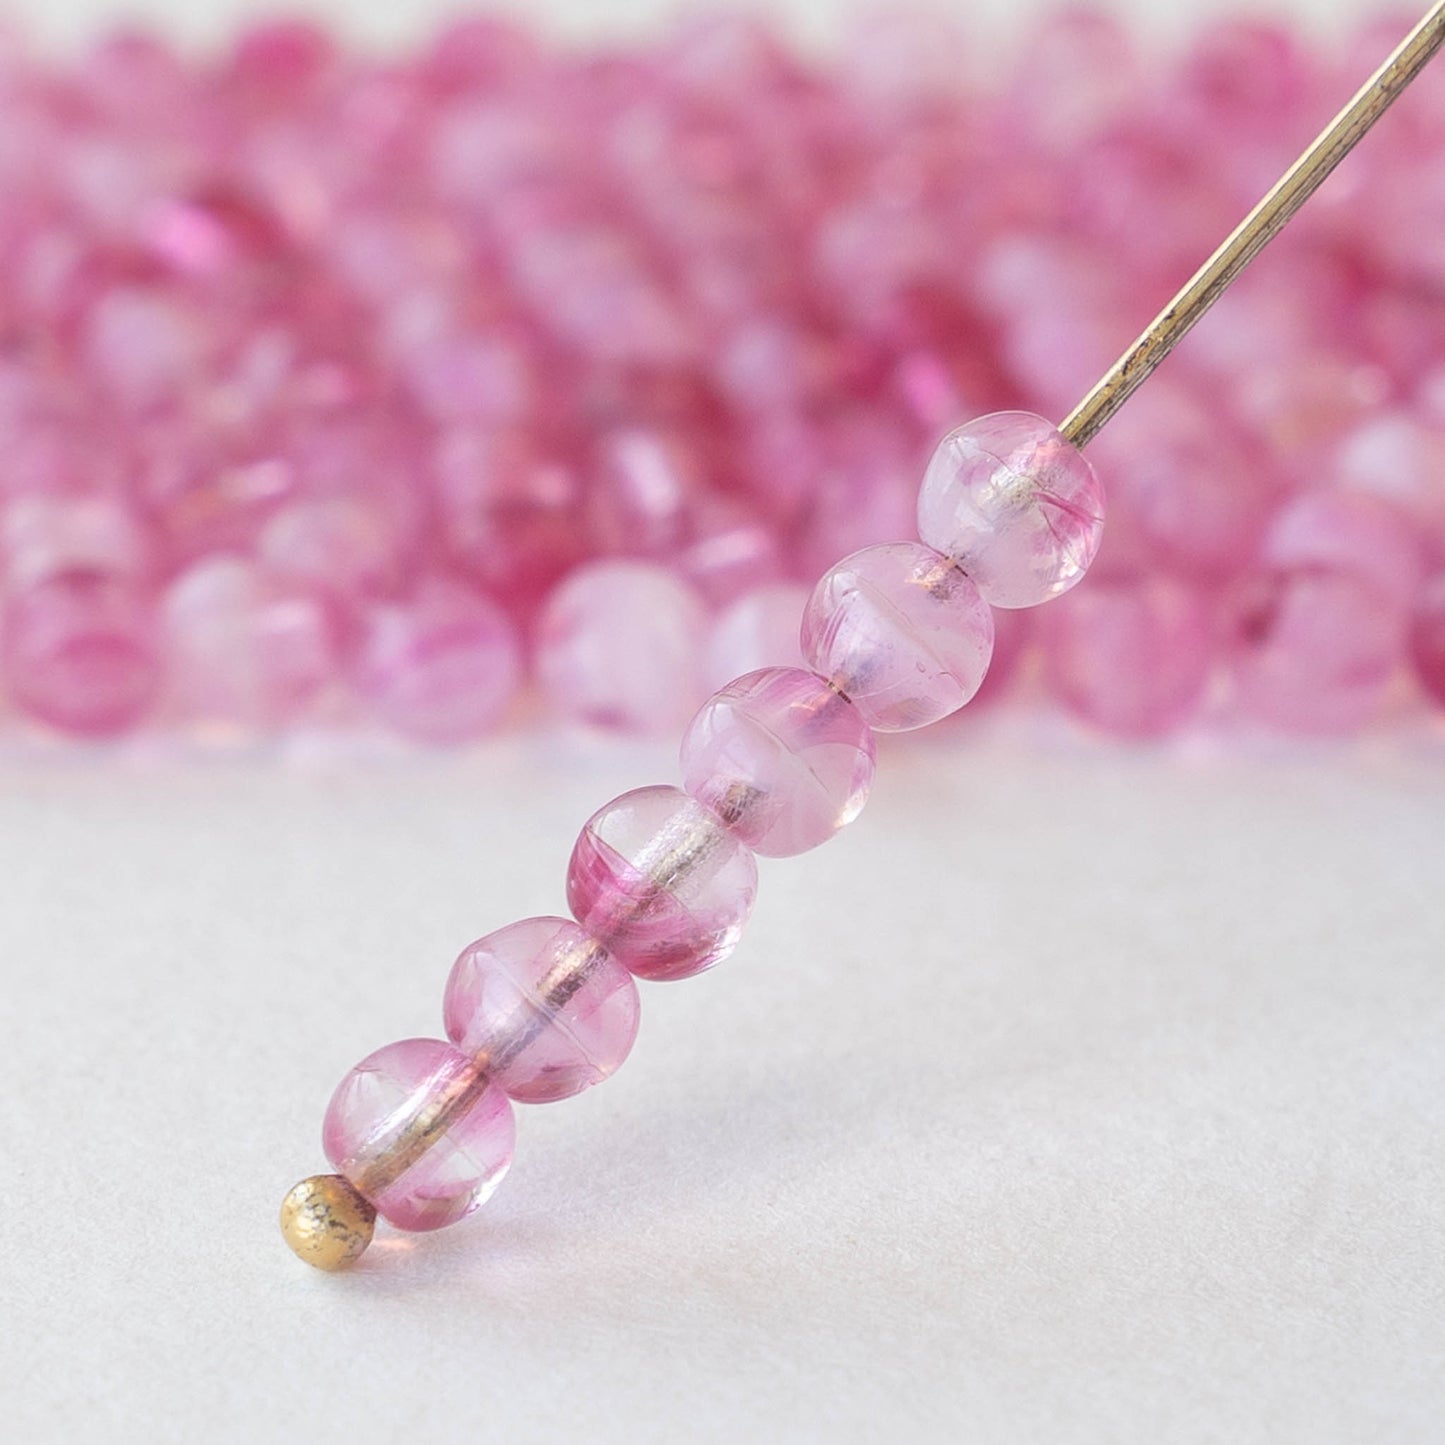 4mm Round Glass Beads - Pink Crystal Mix - 100 Beads